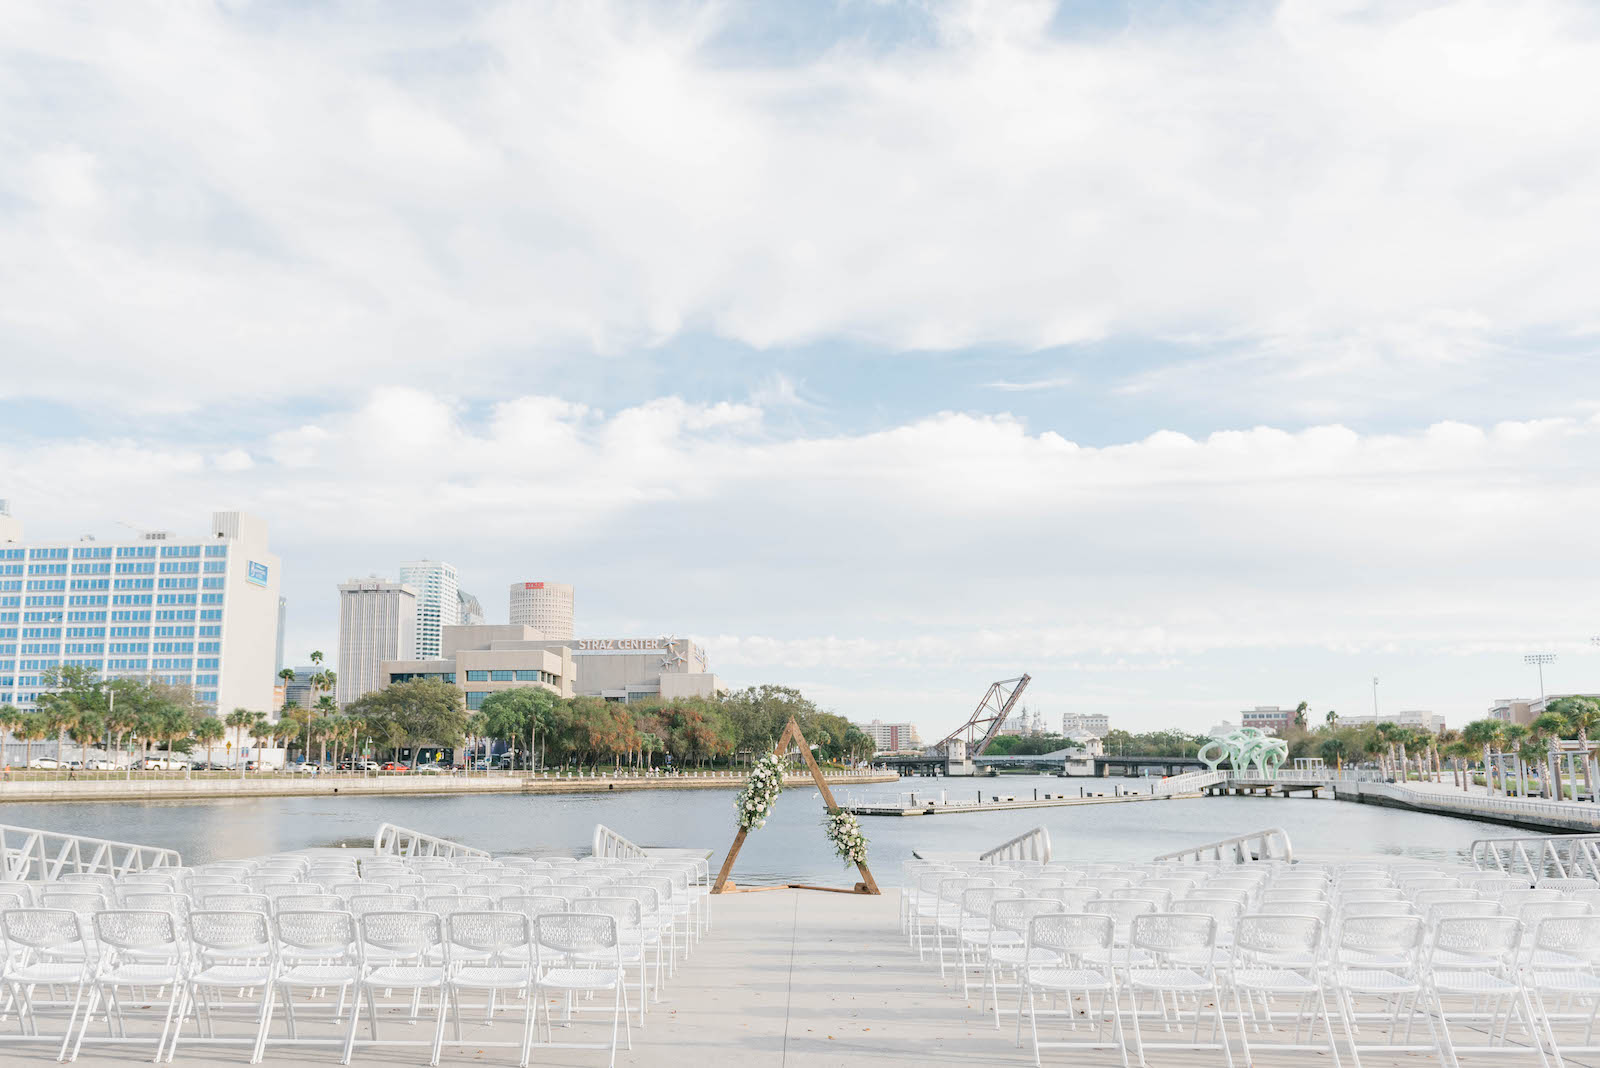 Waterfront Tampa Wedding Ceremony Decor, Triangular Arch with Flowers | Wedding Venue The Tampa River Center | Wedding Planner Parties A'la Carte